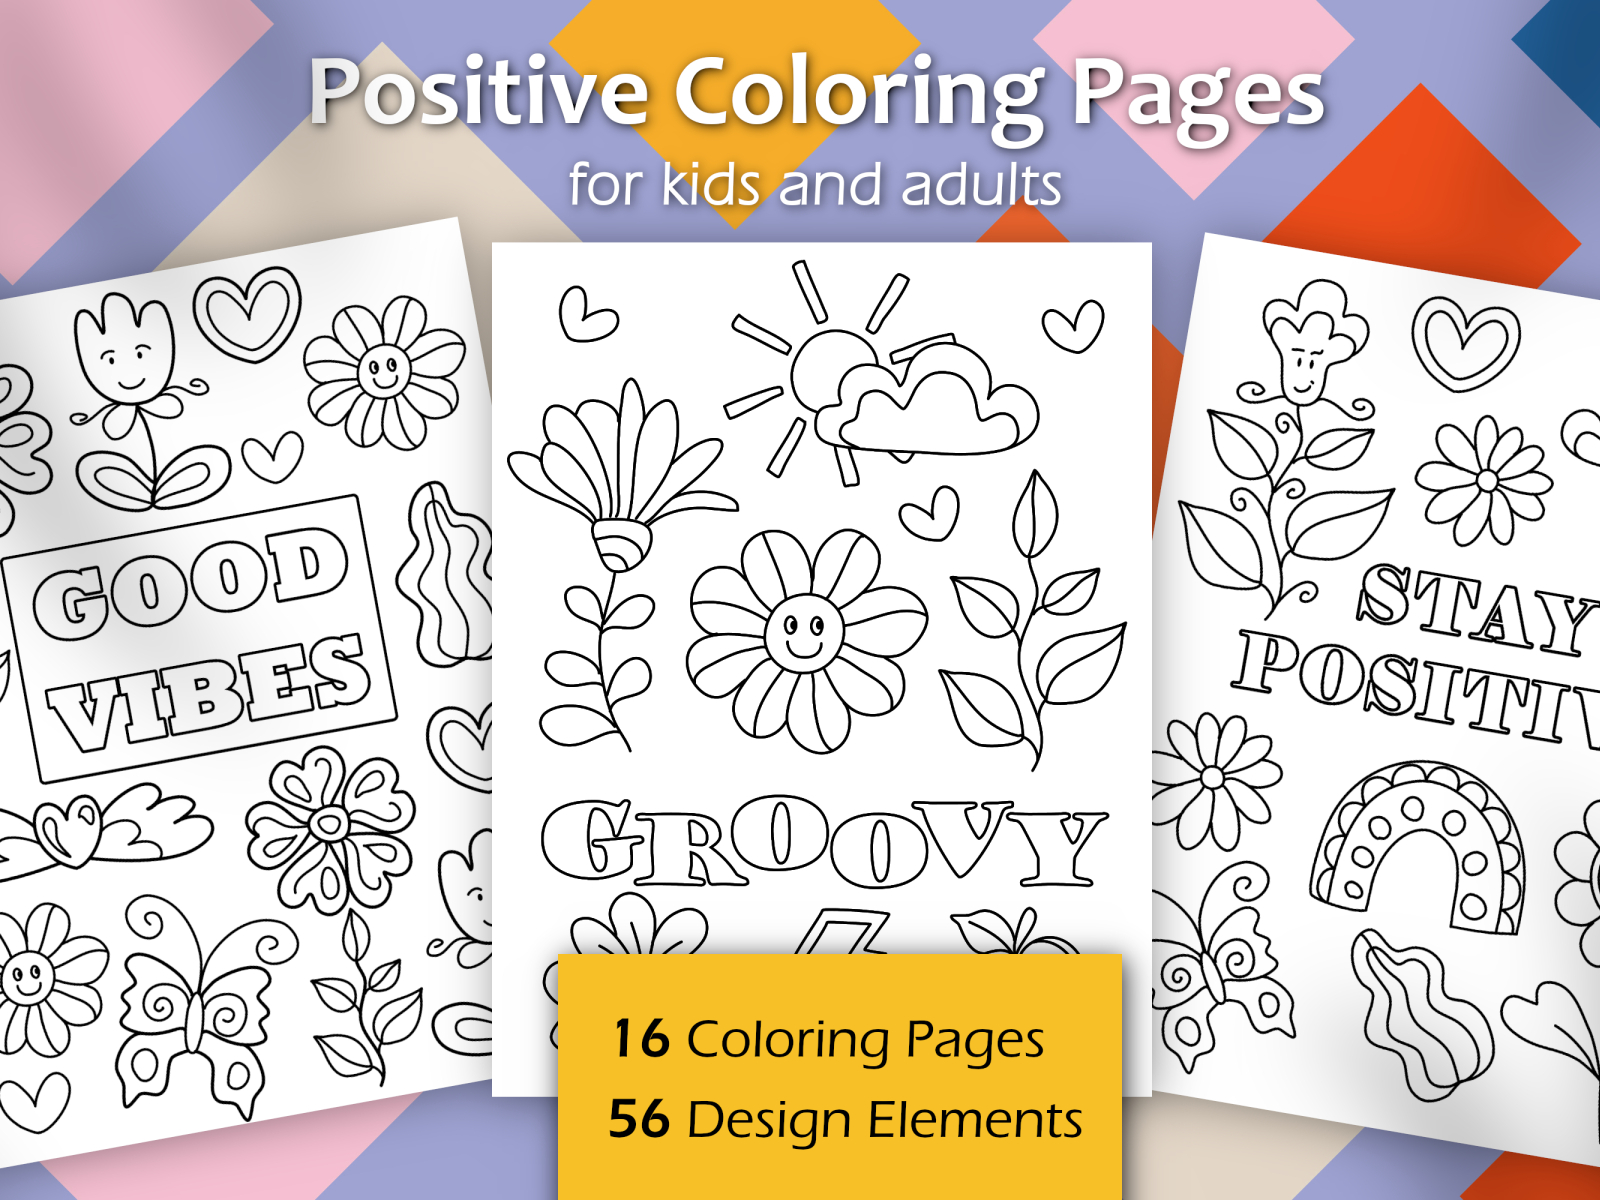 Big Collection of Positive Groovy Coloring Pages 60s 70s adult anti stress art coloring book coloring pages colouring page for children for kids girl good vibes groovy hippie illustration mandalas positive psychedelic style trendy